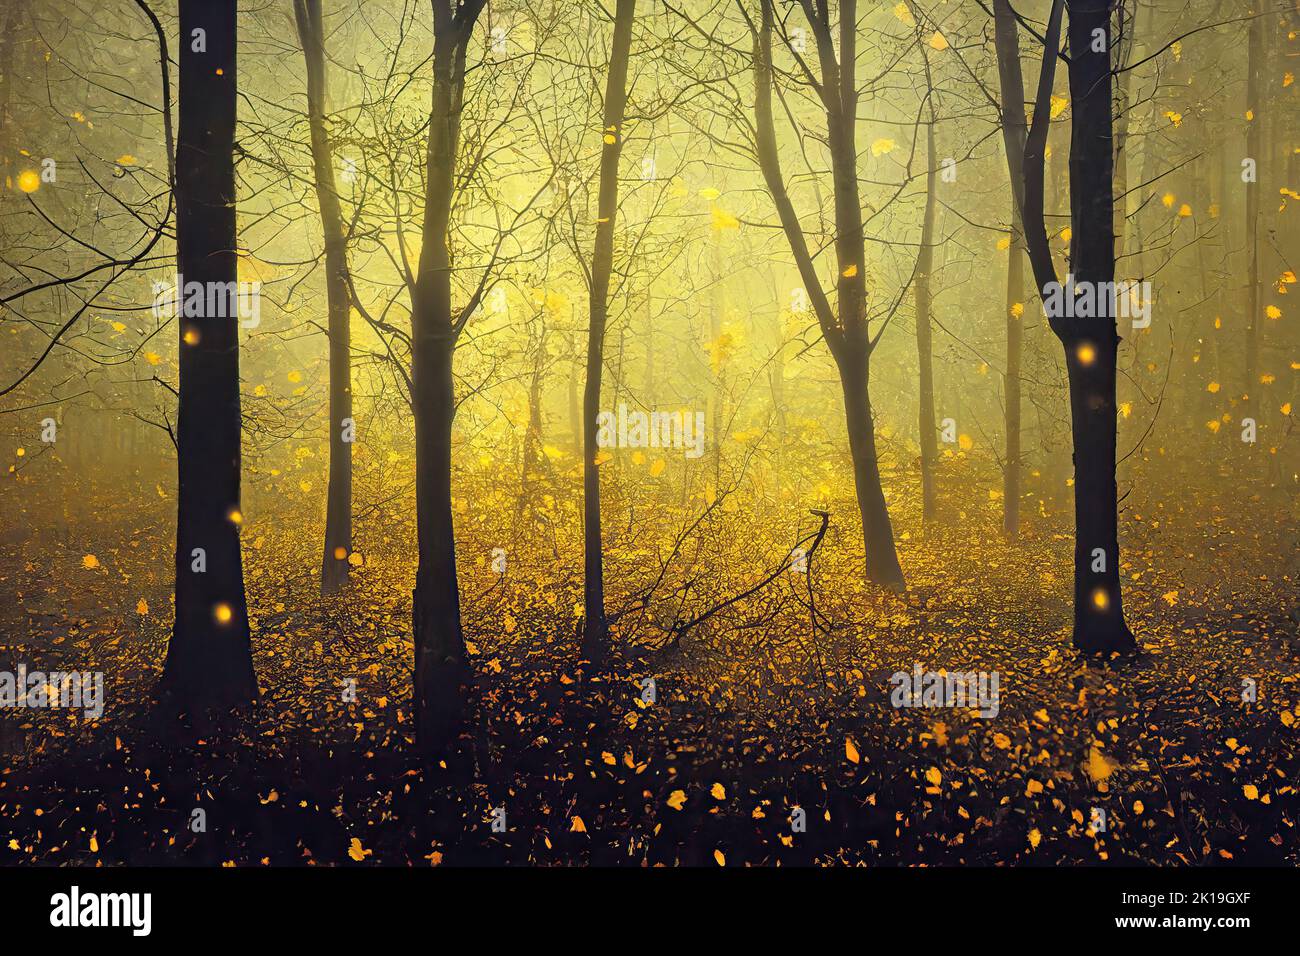 Enchanted forest during leaf fall, mysterious golden mist in the woods at dusk. Digital illustration based on render by neural network Stock Photo